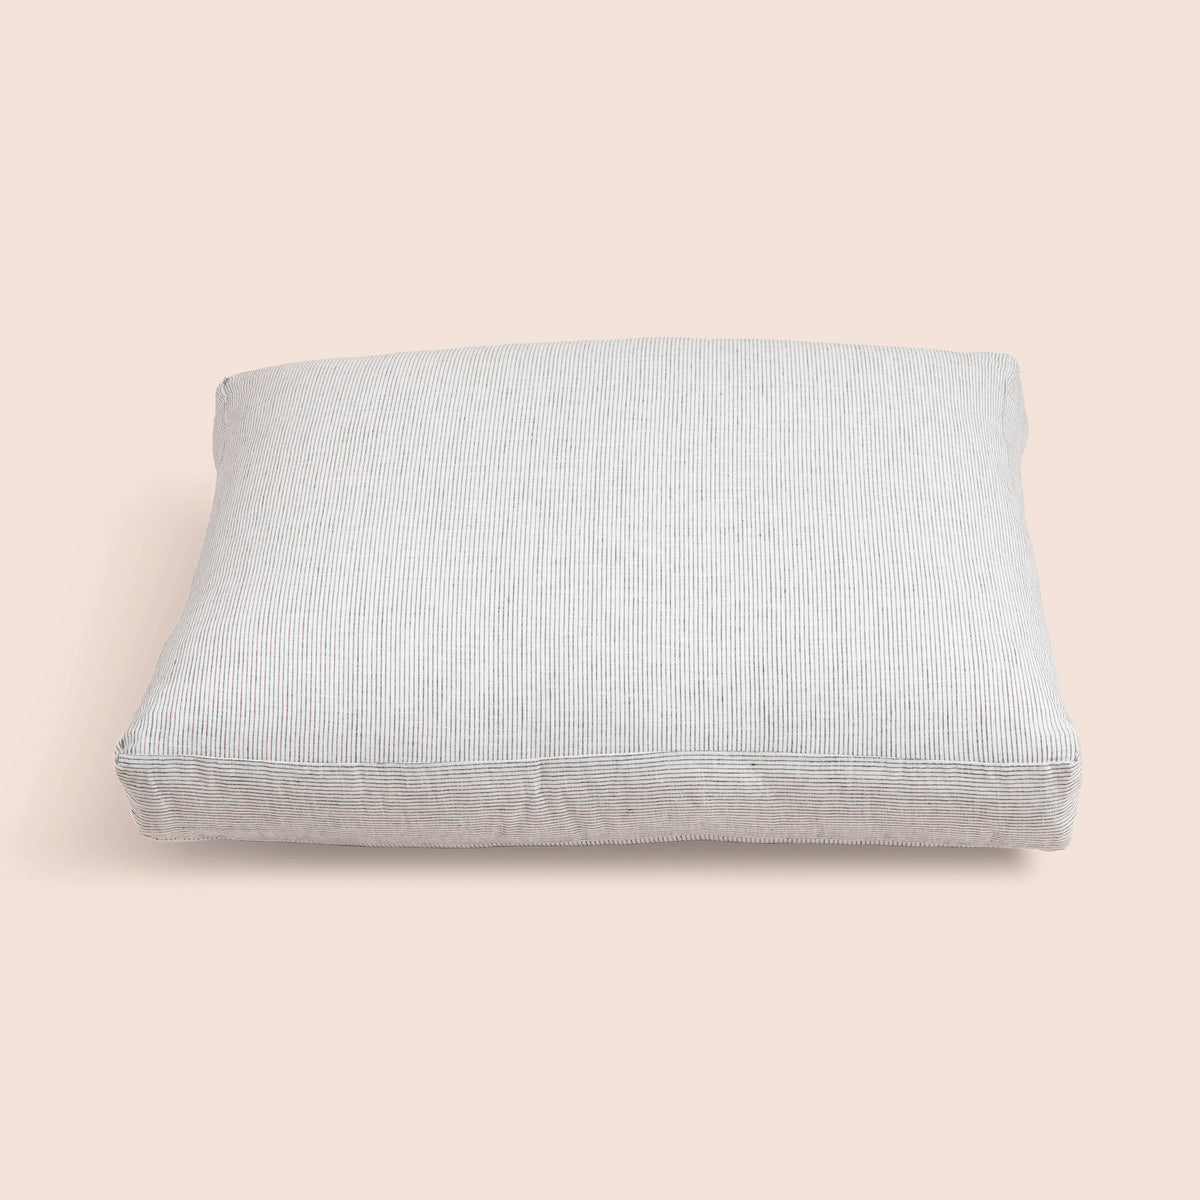 Image of the Pinstripe Relaxed Hemp Meditation Cushion Cover on a meditation cushion with a light pink background